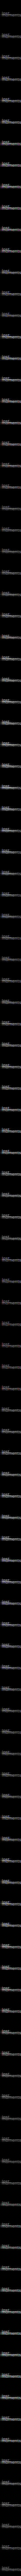 lost.moments